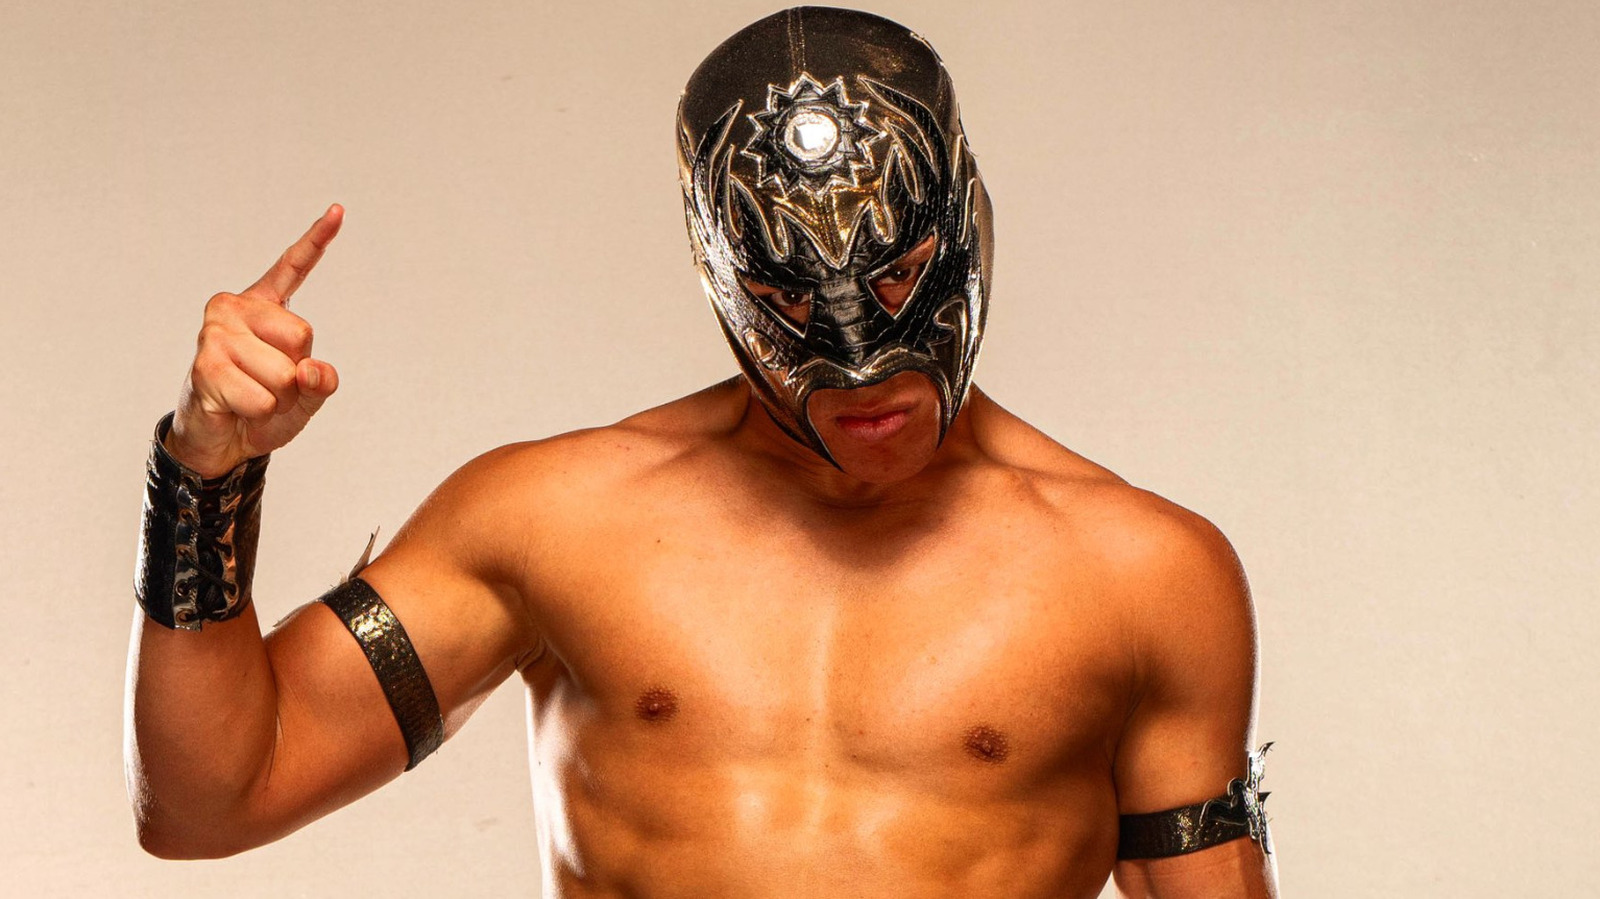 Fuego Del Sol Announces He's Finished With All Elite Wrestling